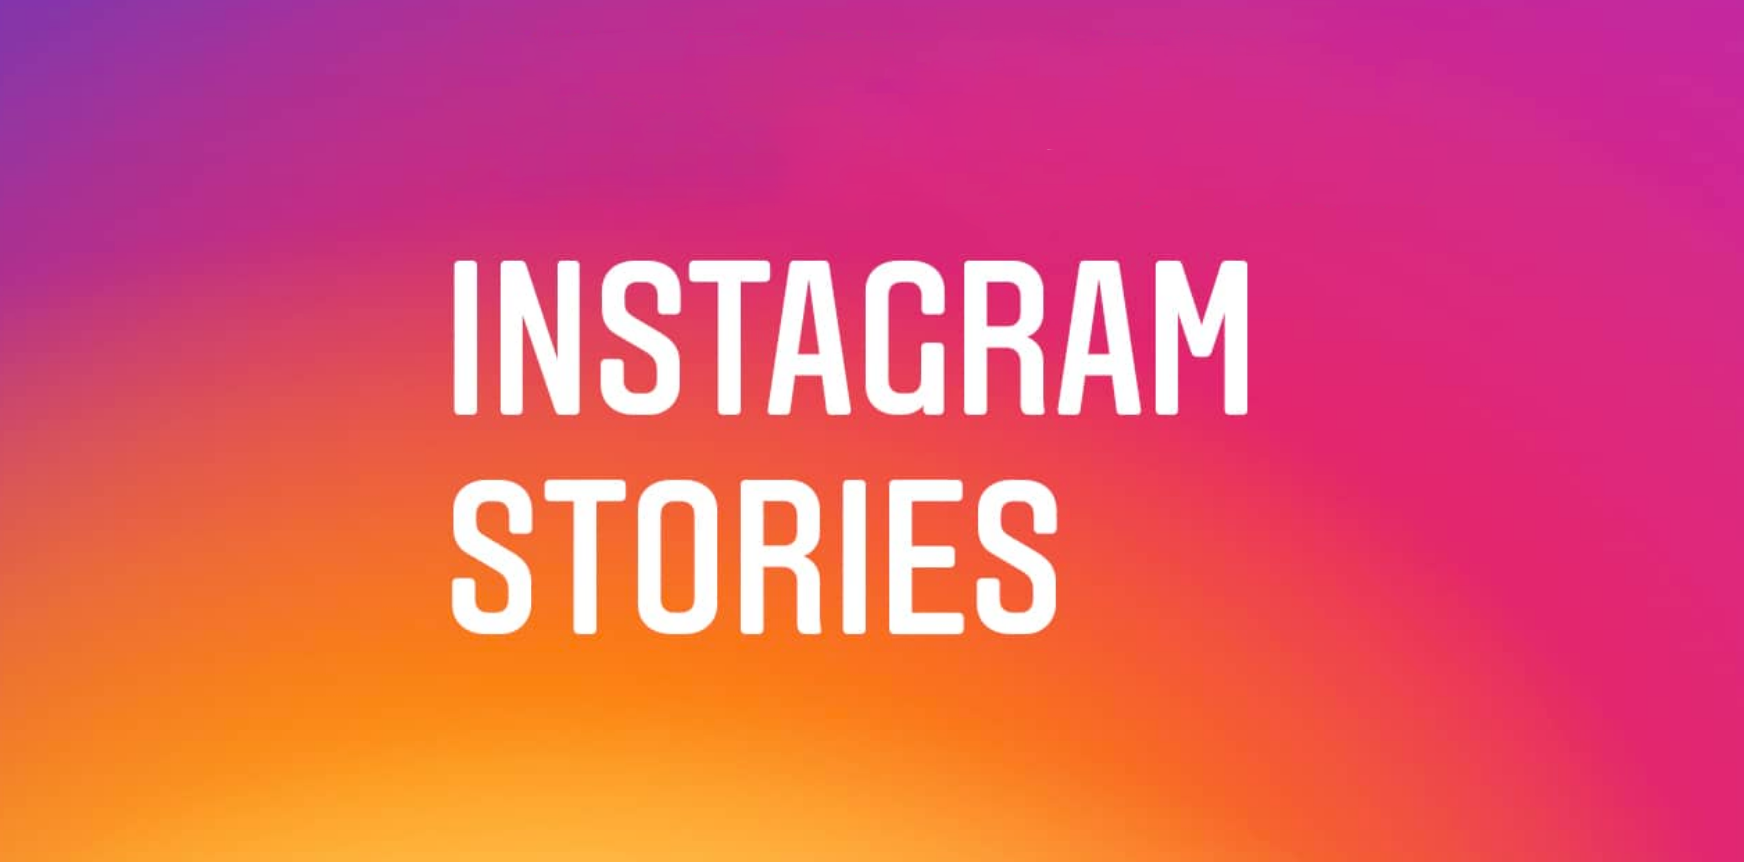 Promotional graphics for Instagram Stories